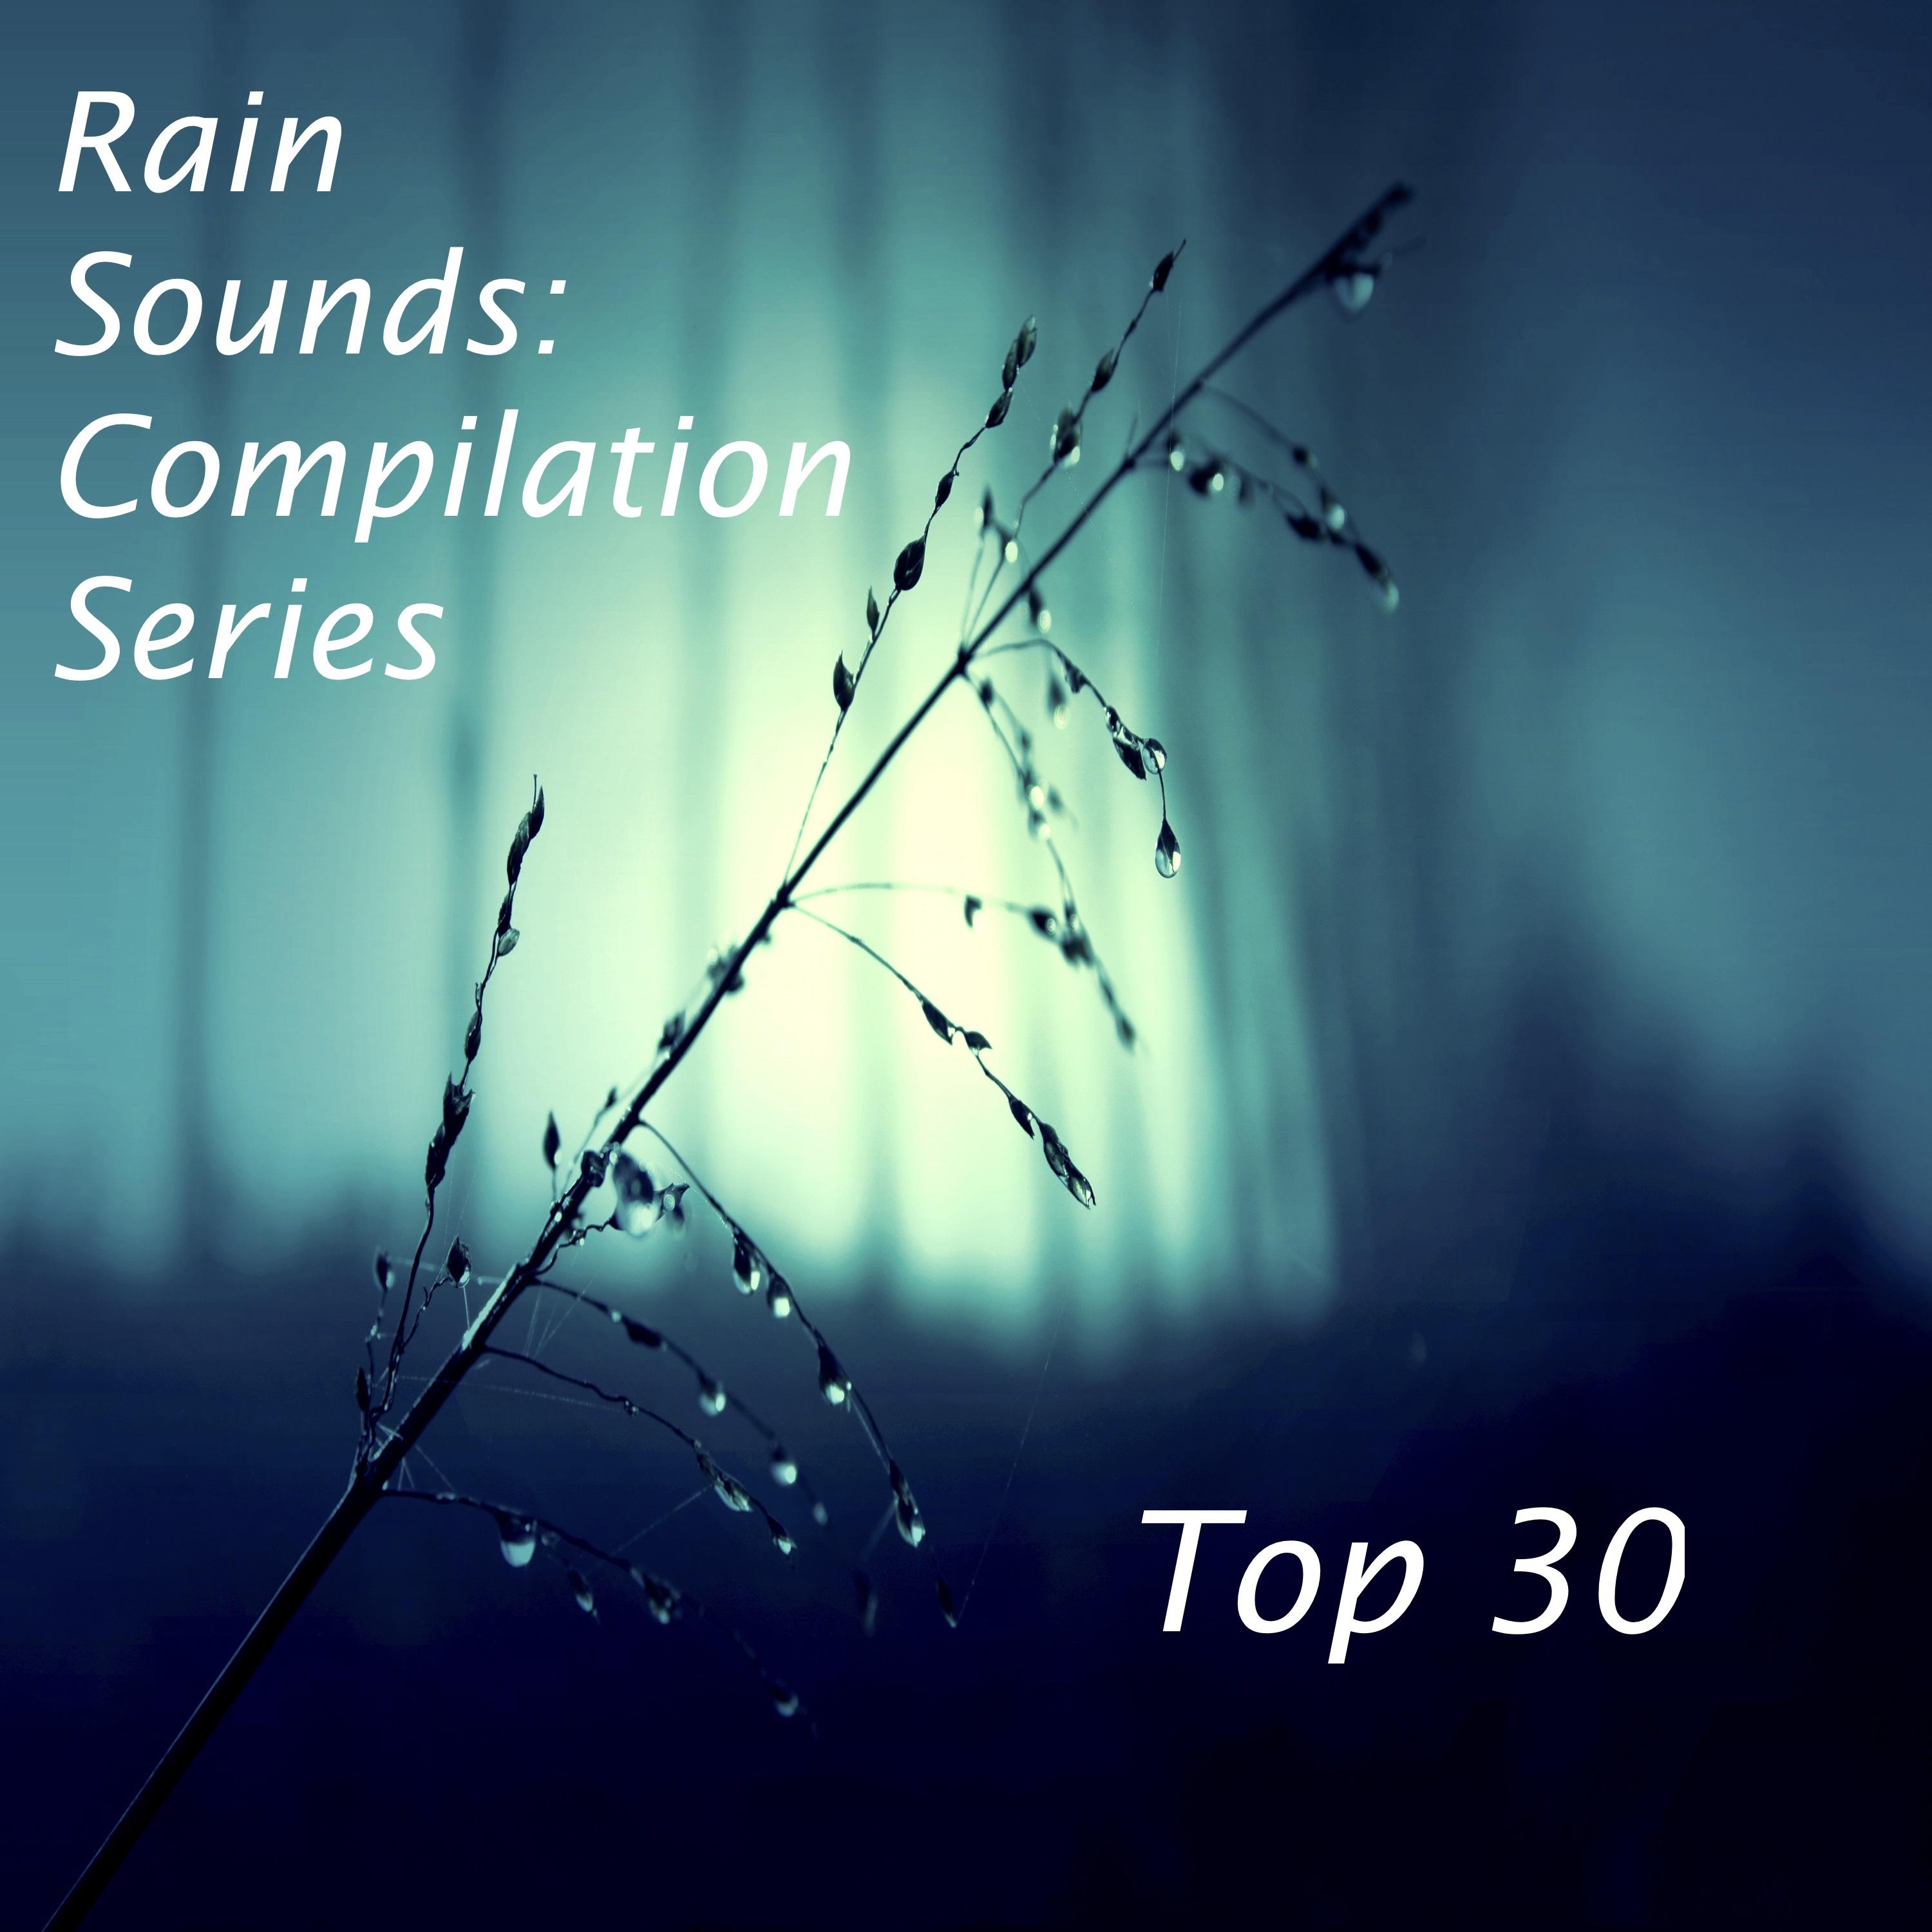 2017 Compilation: Top 30 Loopable Rain Sounds for Deep Sleep, Insomnia, Meditation and Relaxation